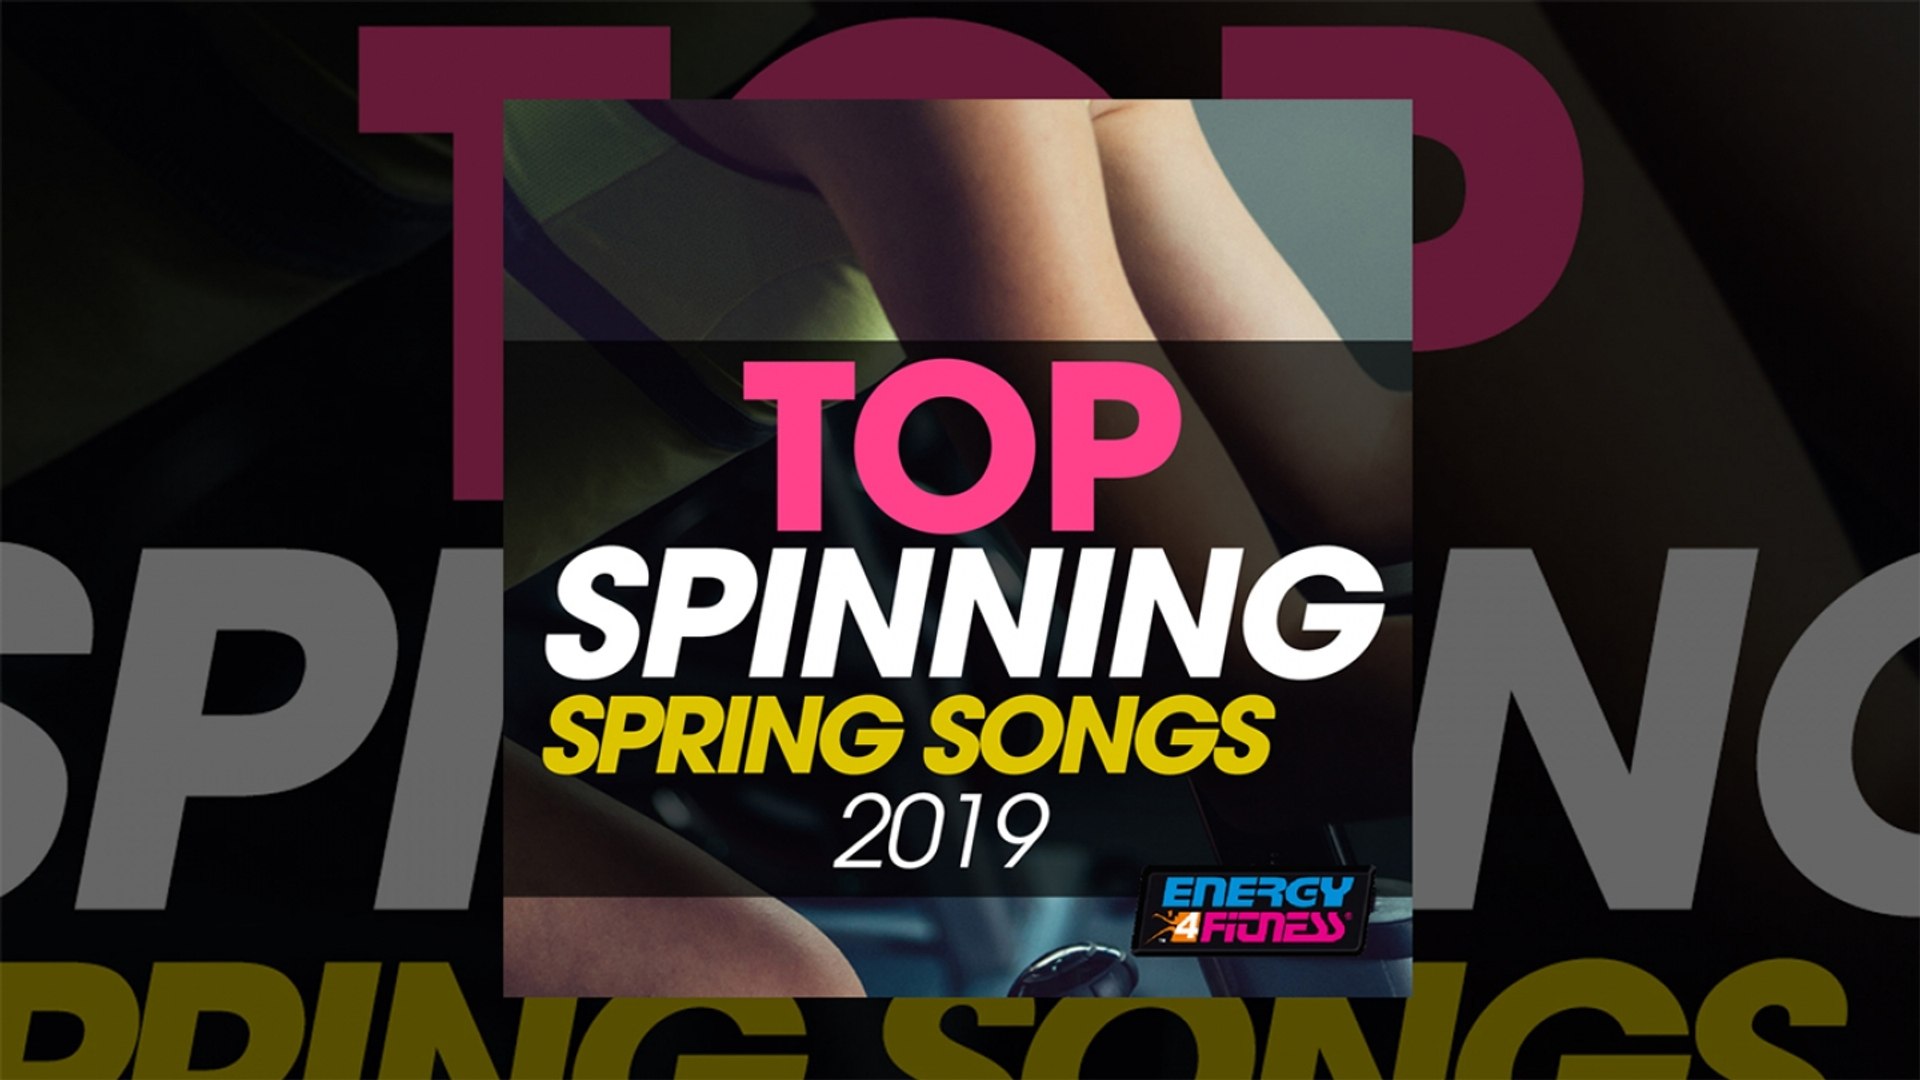 E4F - Top Spinning Spring Songs 2019 - Fitness & Music 2019